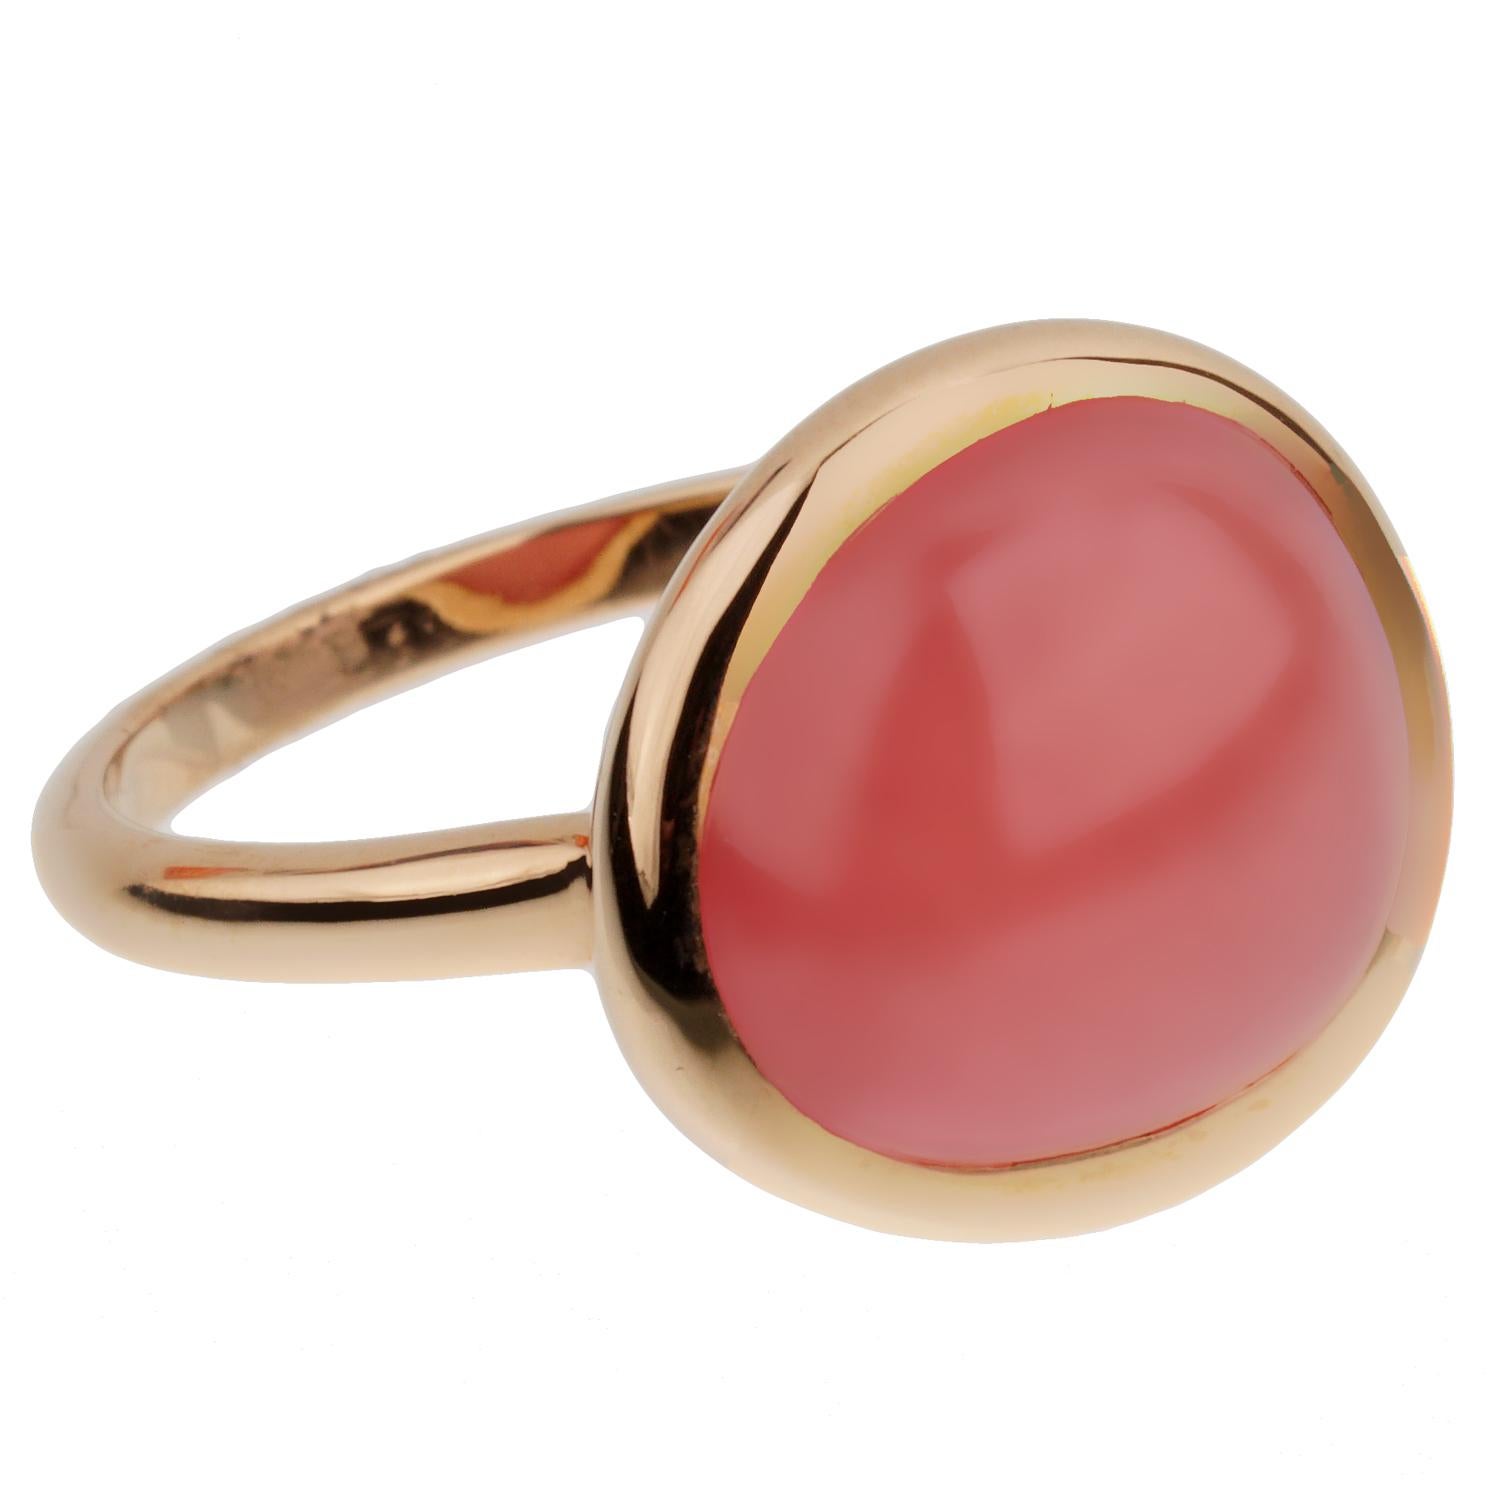 A chic Fred of Paris rose gold cocktail ring showcasing a 7ct cabochon Rhodochrosite set in 18k gold. The ring measures a size 6 3/4 and can be resized if needed.